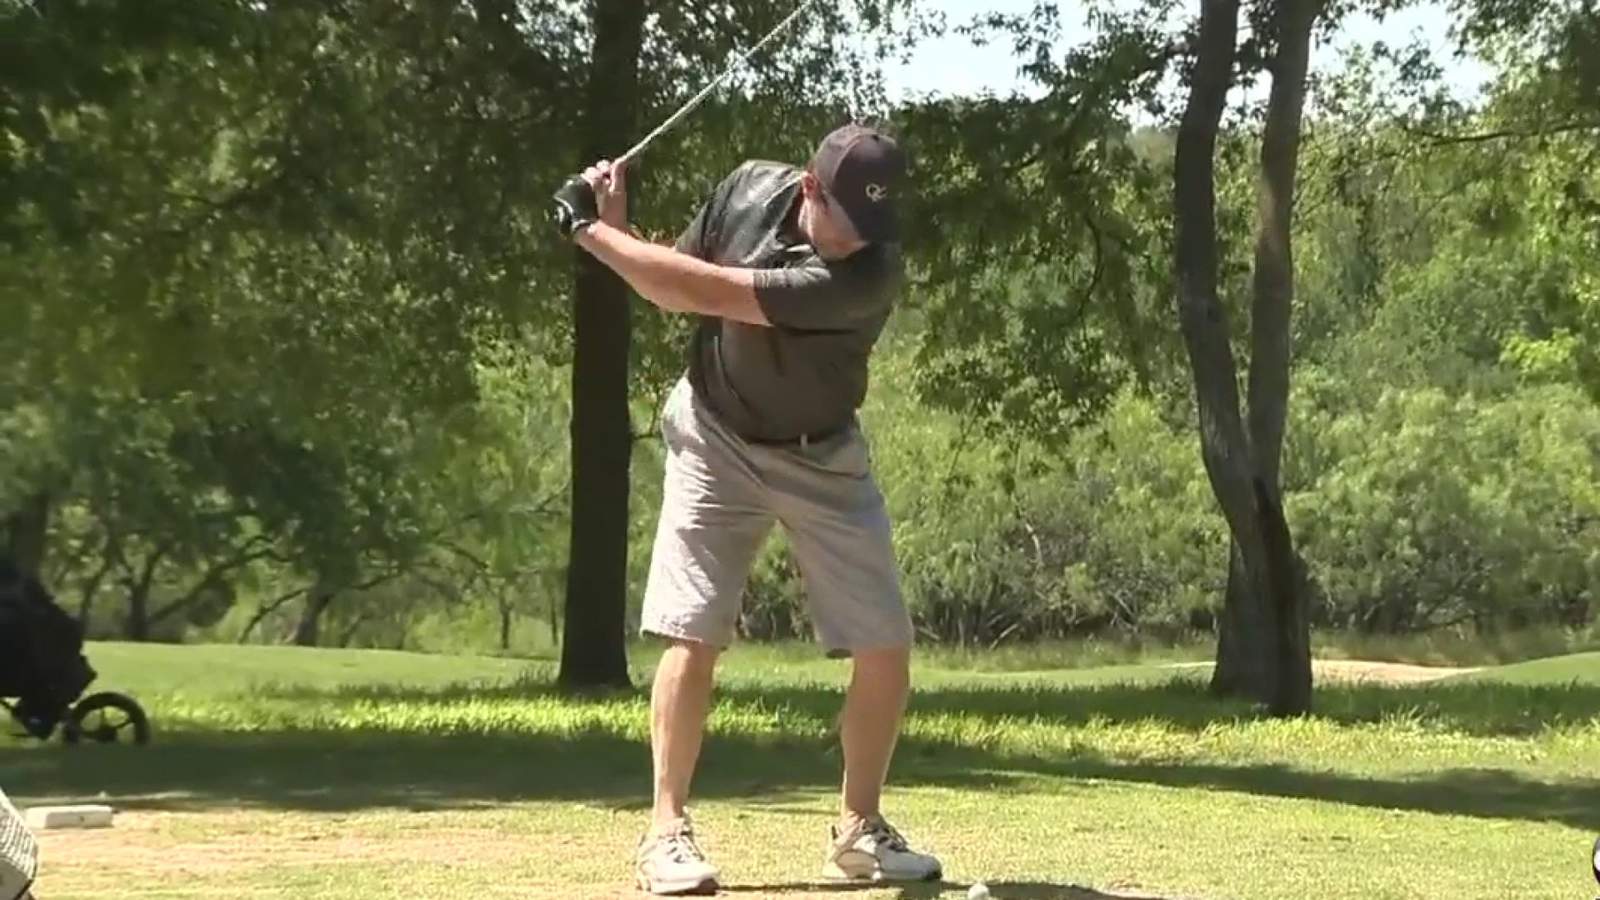 Private golf courses reopen in San Antonio; Here’s what to know before hitting links